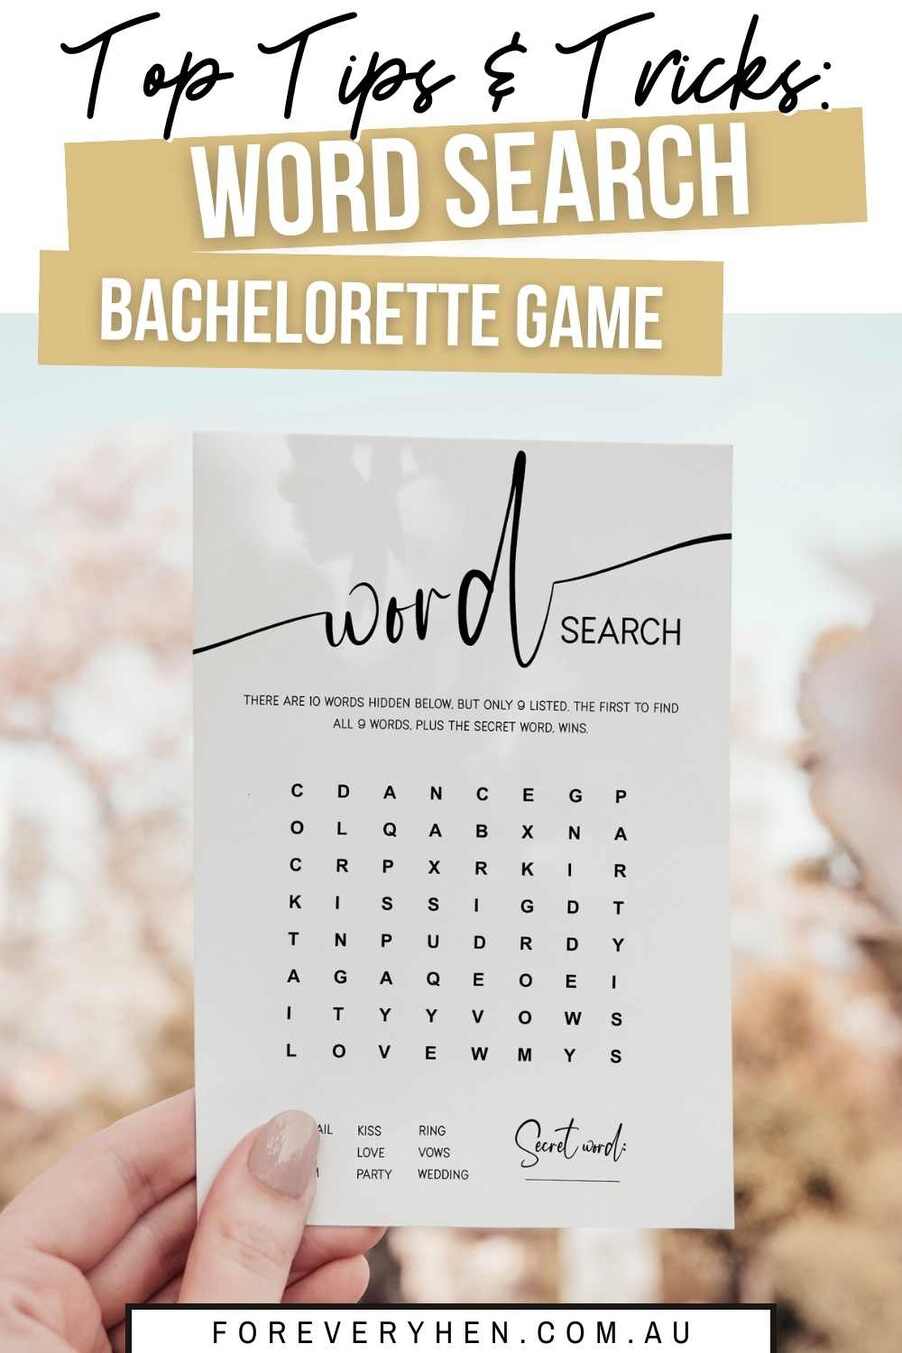 Image of a bridal word search game card on a circle bamboo plate. Text overlay: Tips and tricks - word search bachelorette game